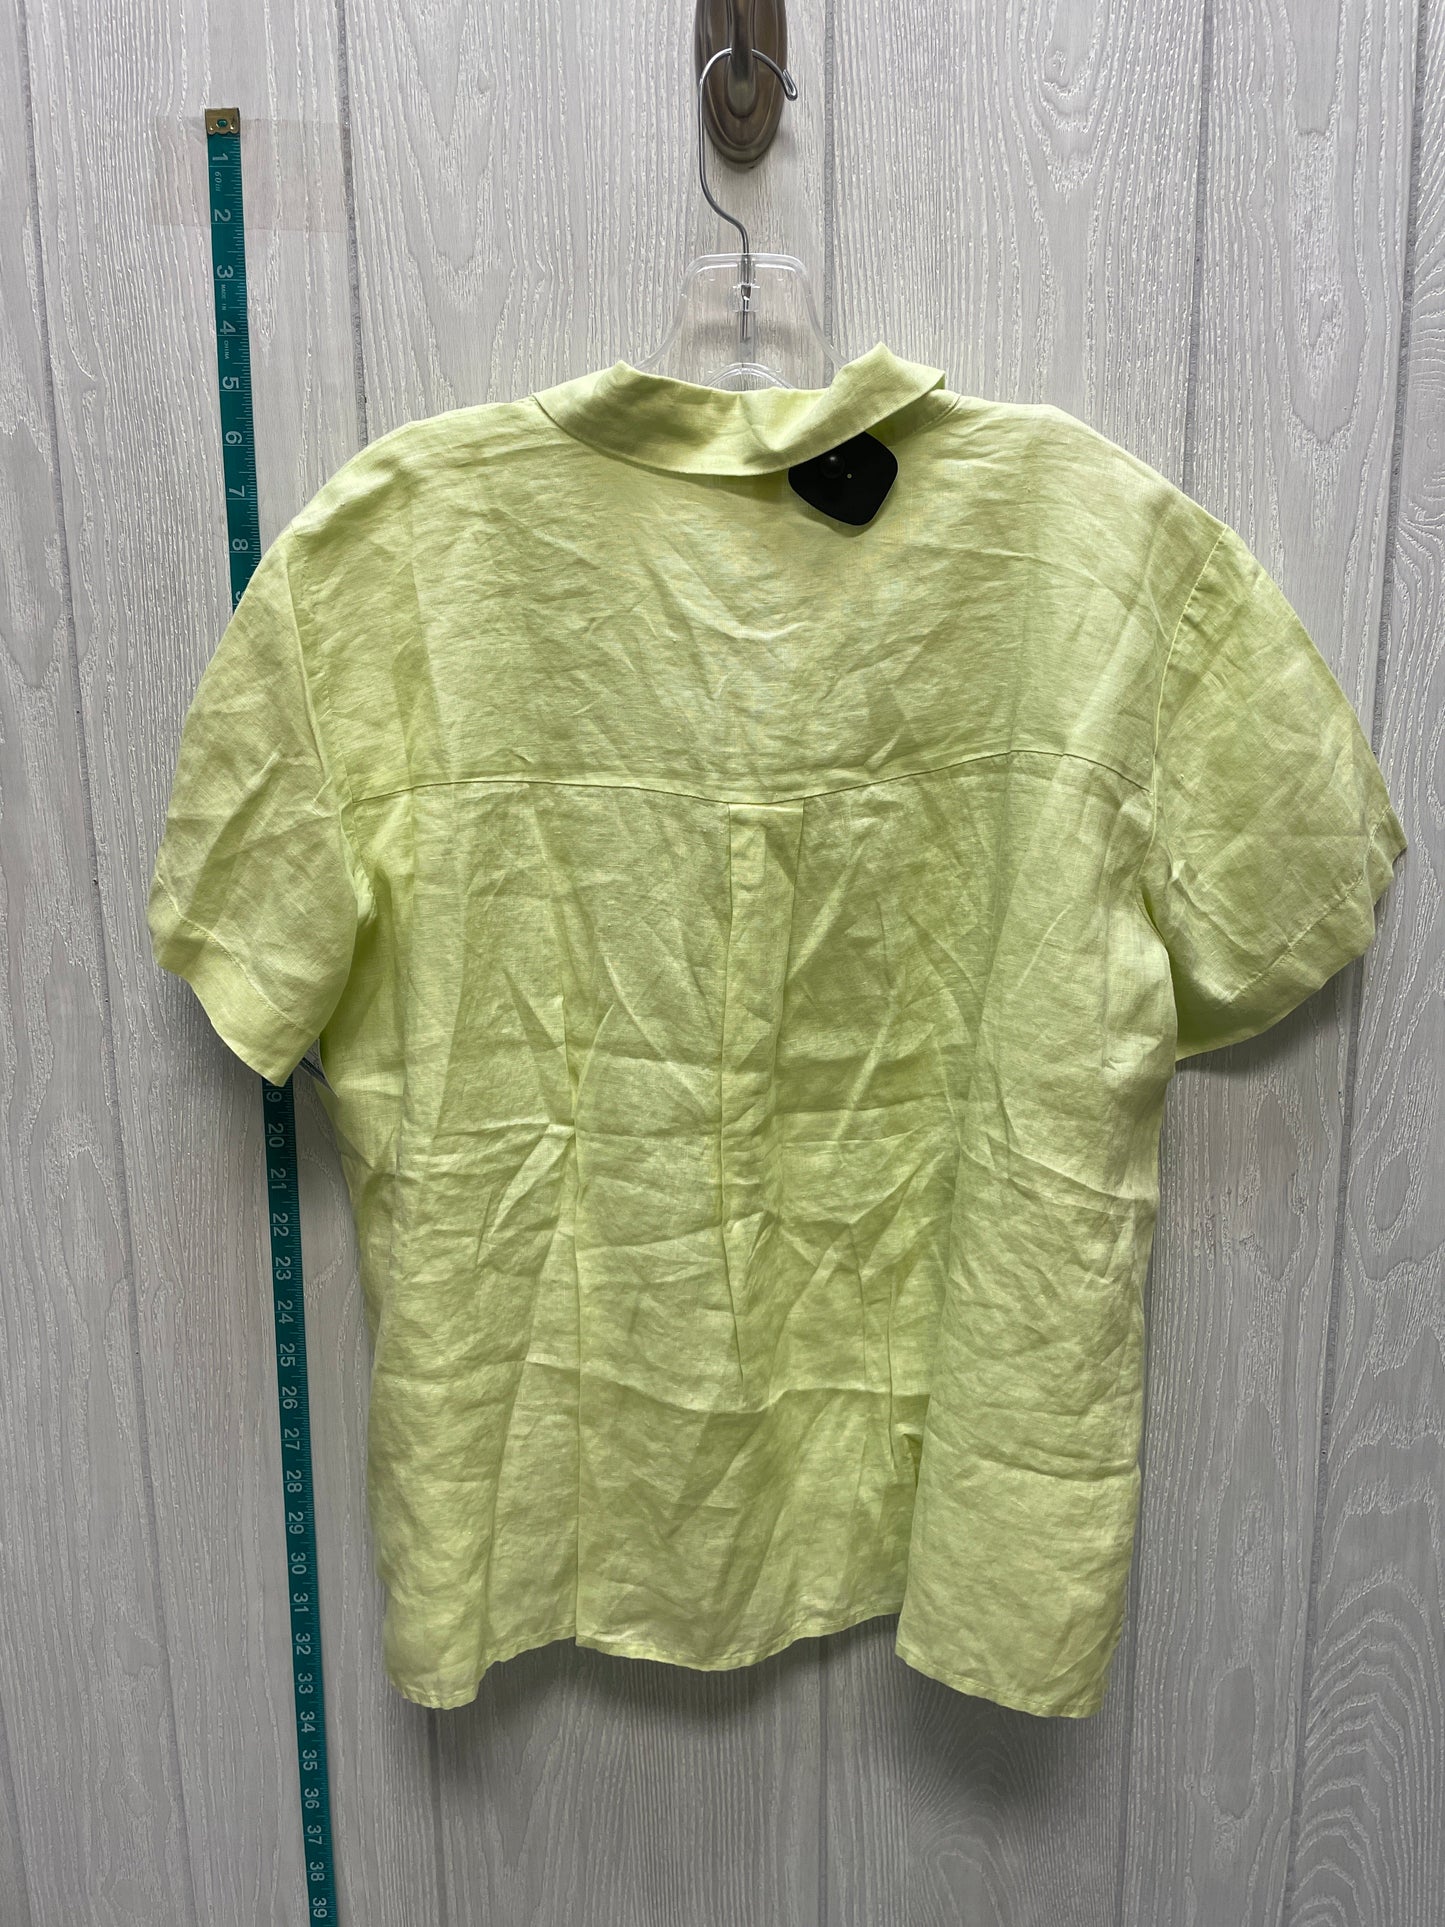 Green Top Short Sleeve Eileen Fisher, Size L